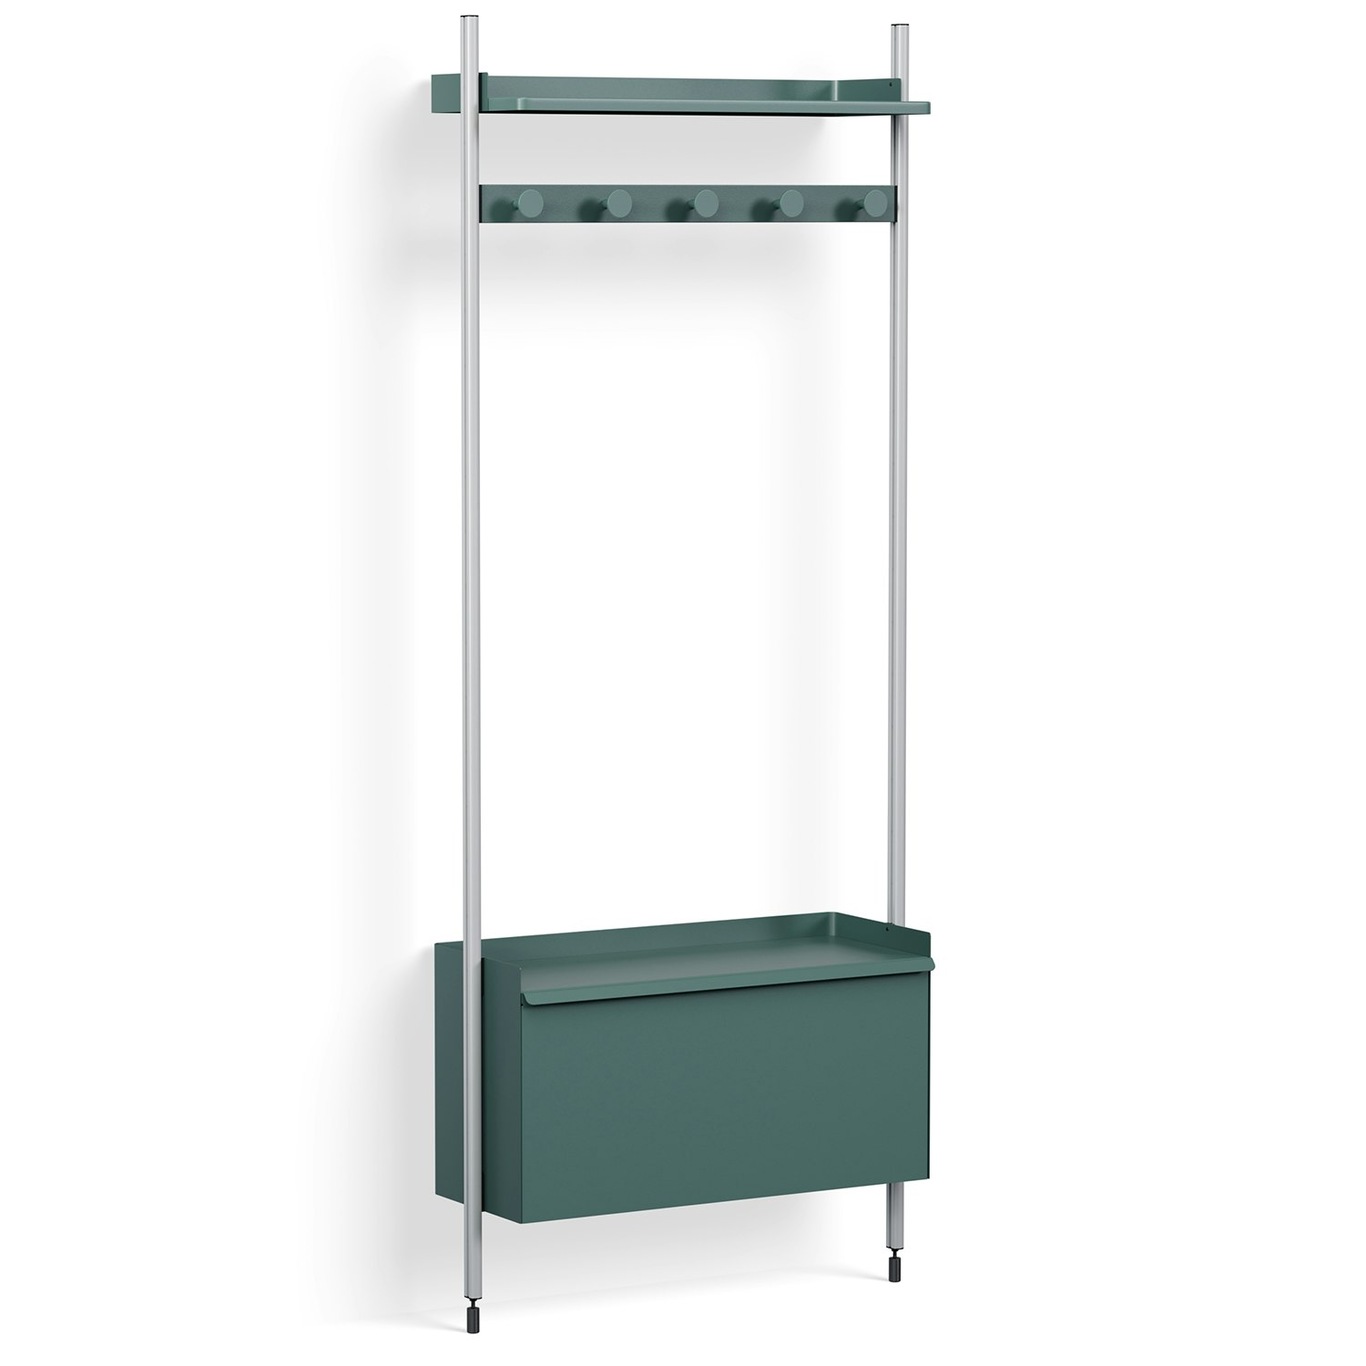 Pier System 1061 Shelving System, Ps Blue